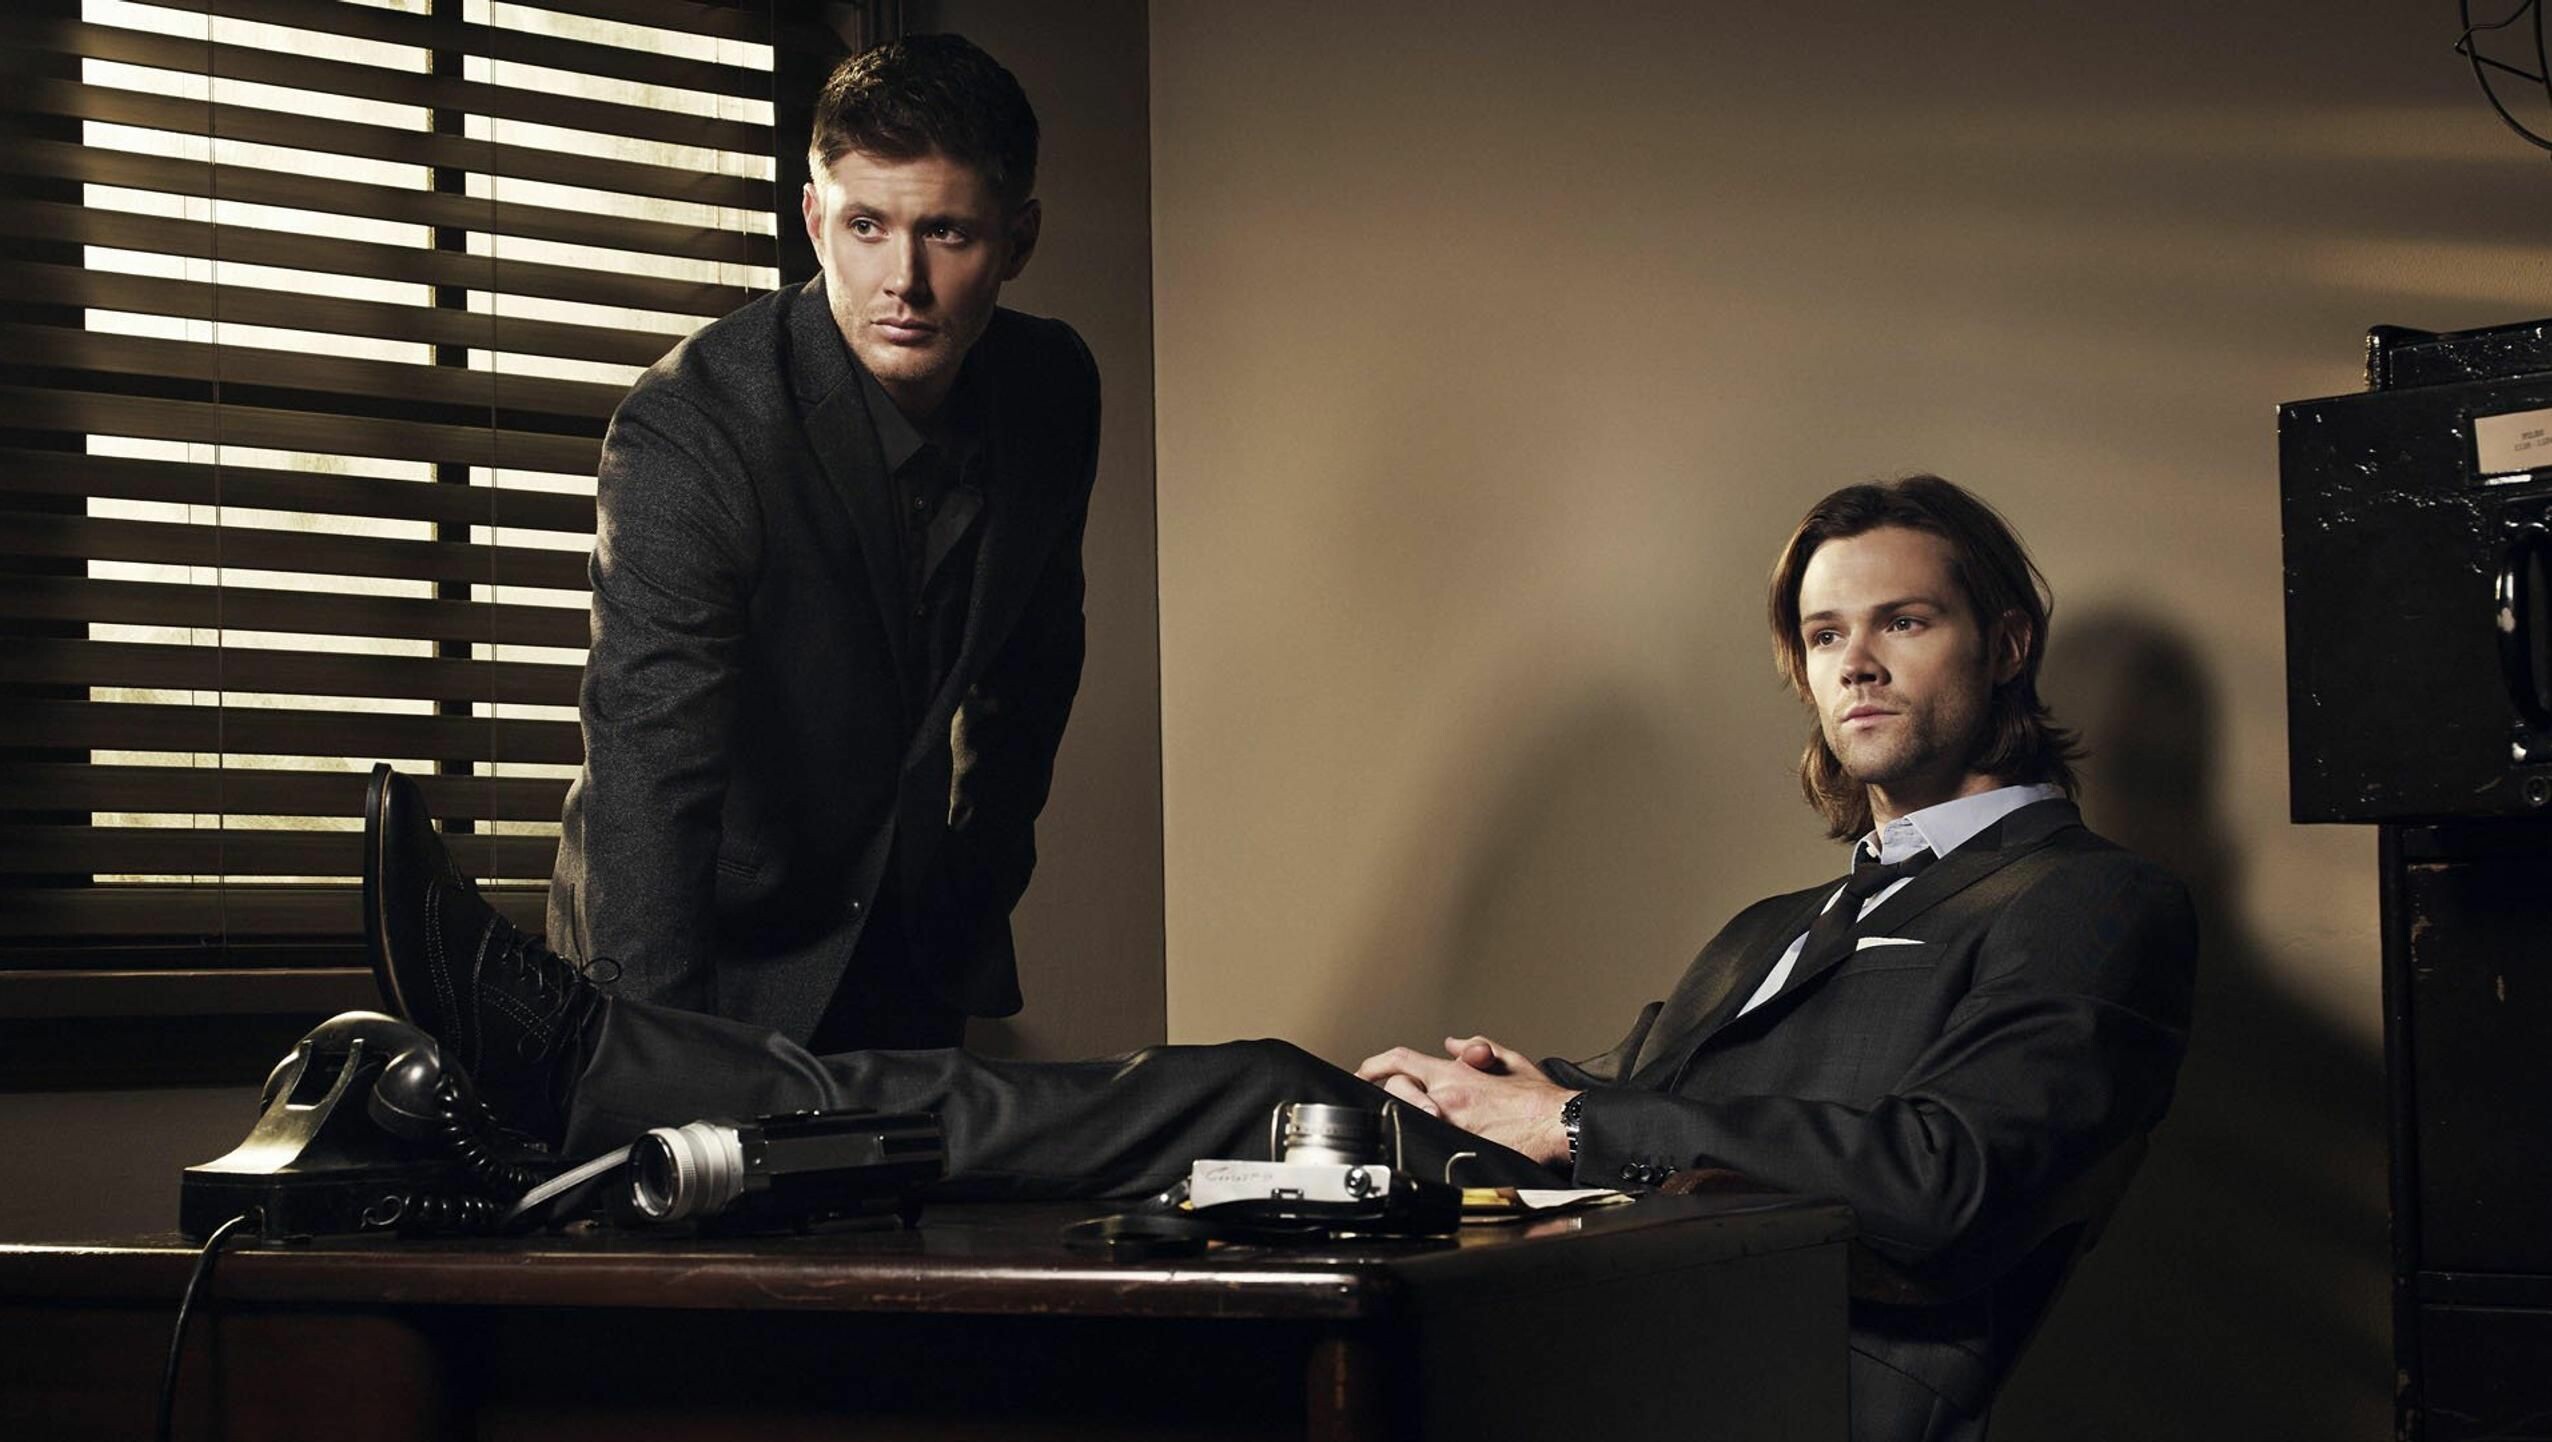 Supernatural: Two brothers who face an increasingly sinister landscape as they hunt monsters. 2560x1450 HD Wallpaper.